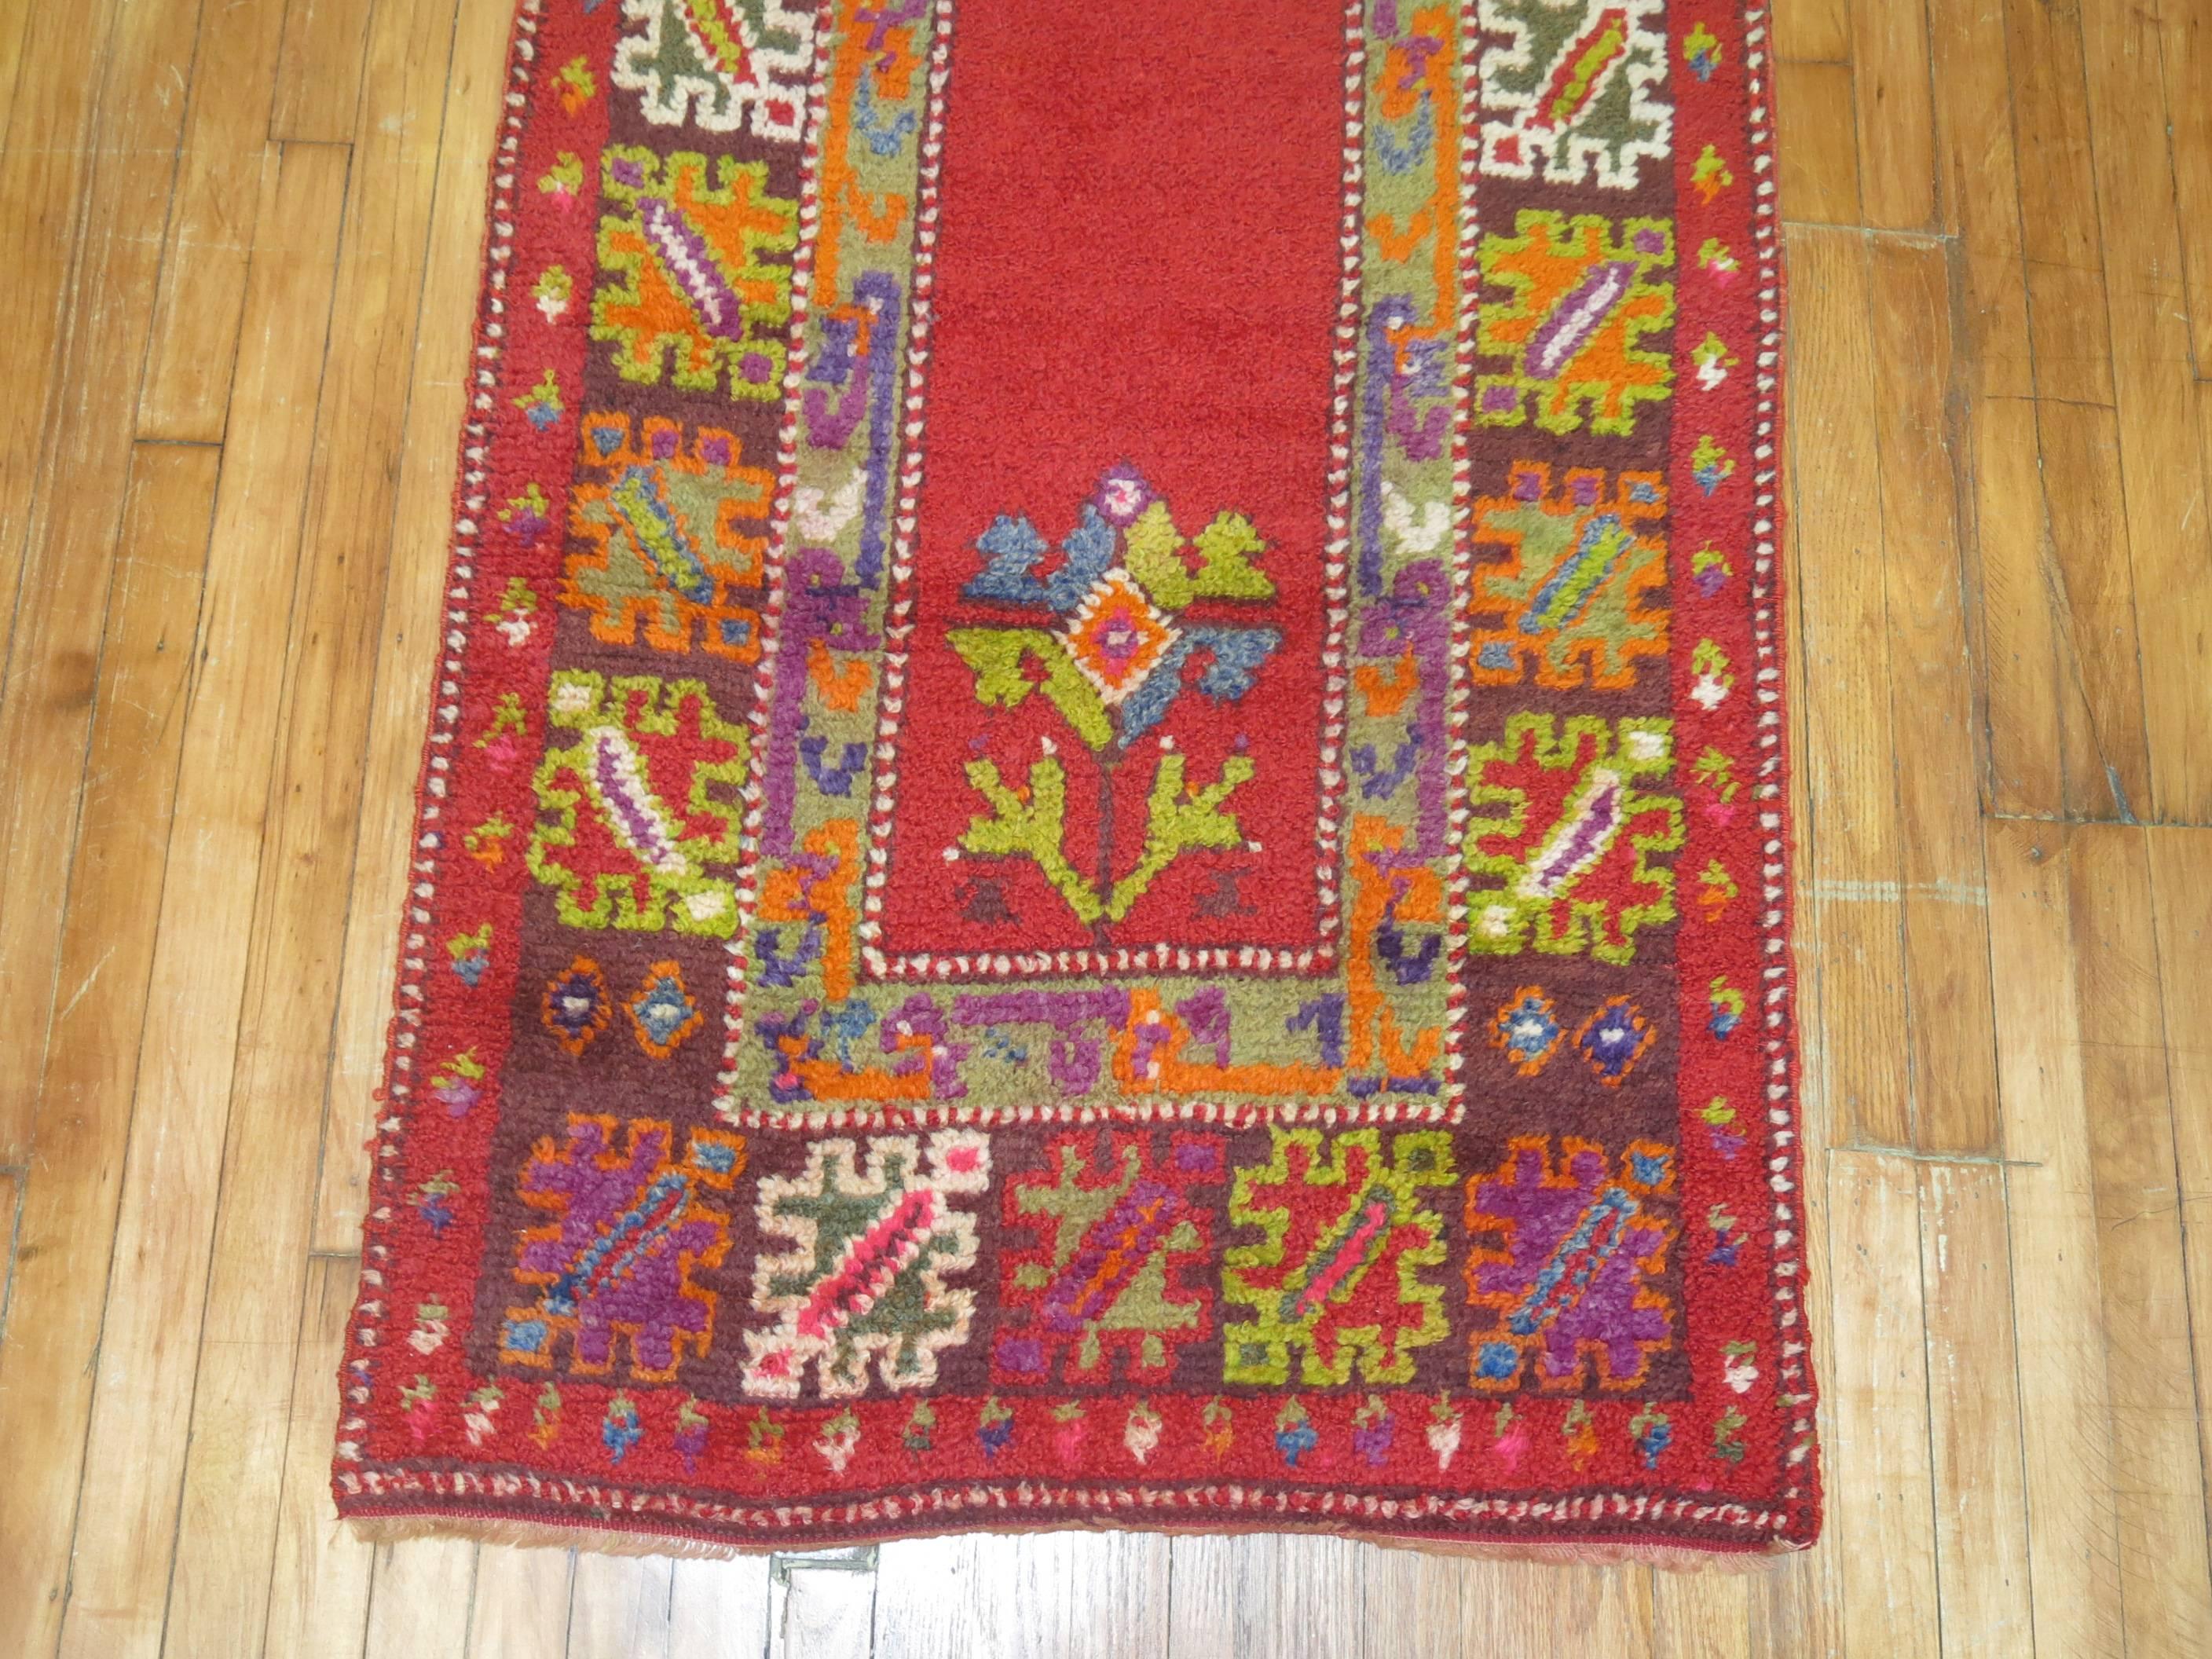 Cheerful Turkish Tulu shag runner featuring a cherry red open ground surrounded by a colorful floral border.

2'11'' x 10'9''